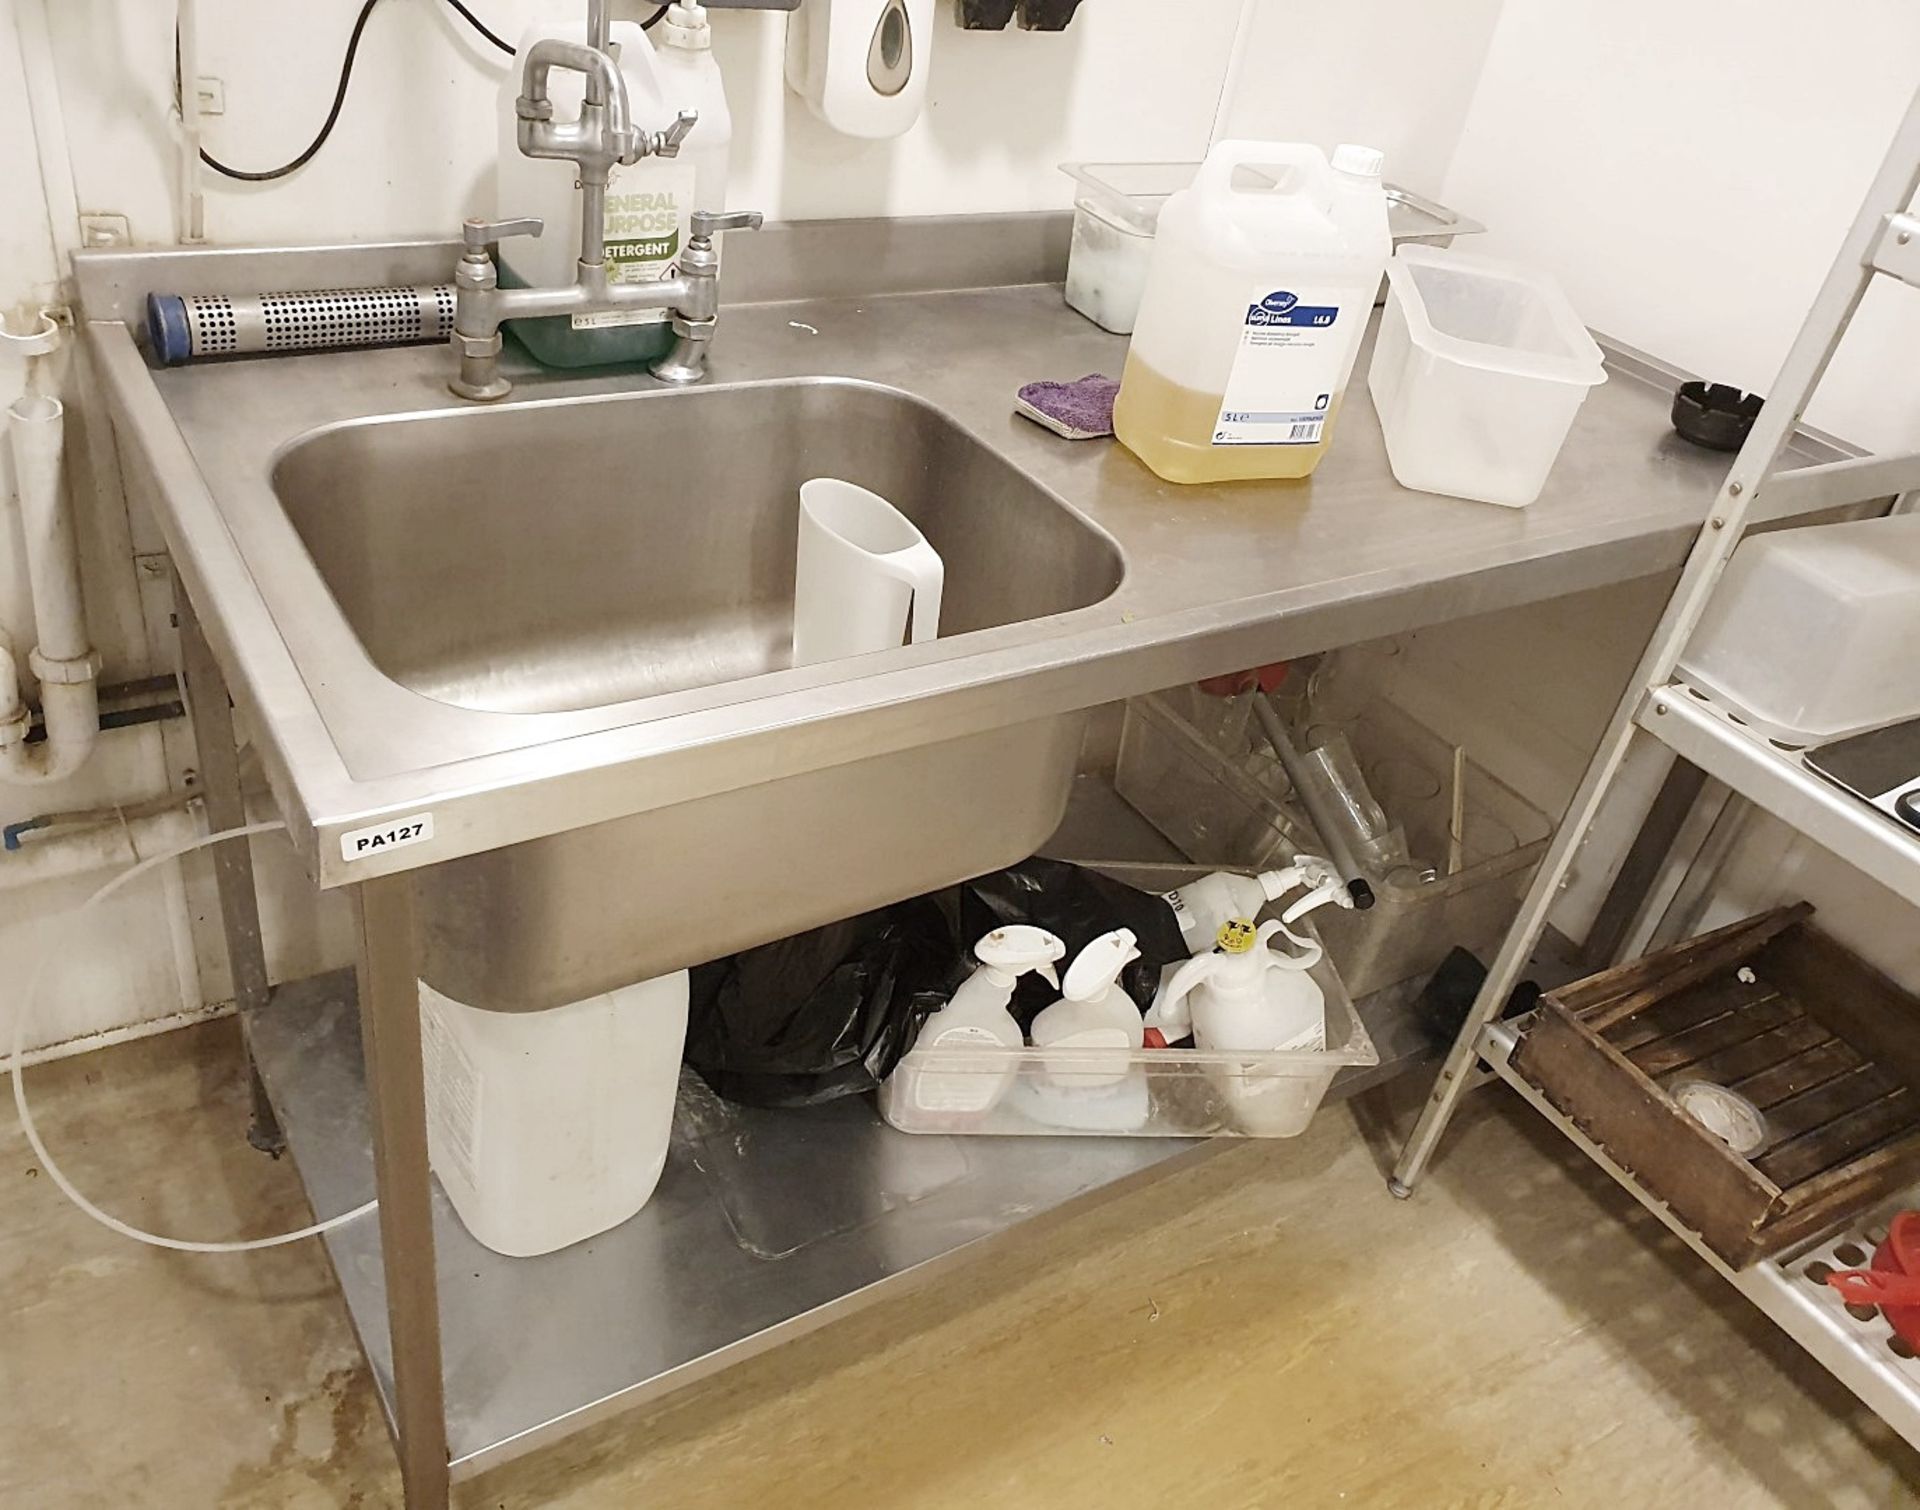 1 x Stainless Steel Wash Bench With Large Sink Bowl, Anti Drip Top, Mixer Tap, Rinser Tap, - Image 2 of 6